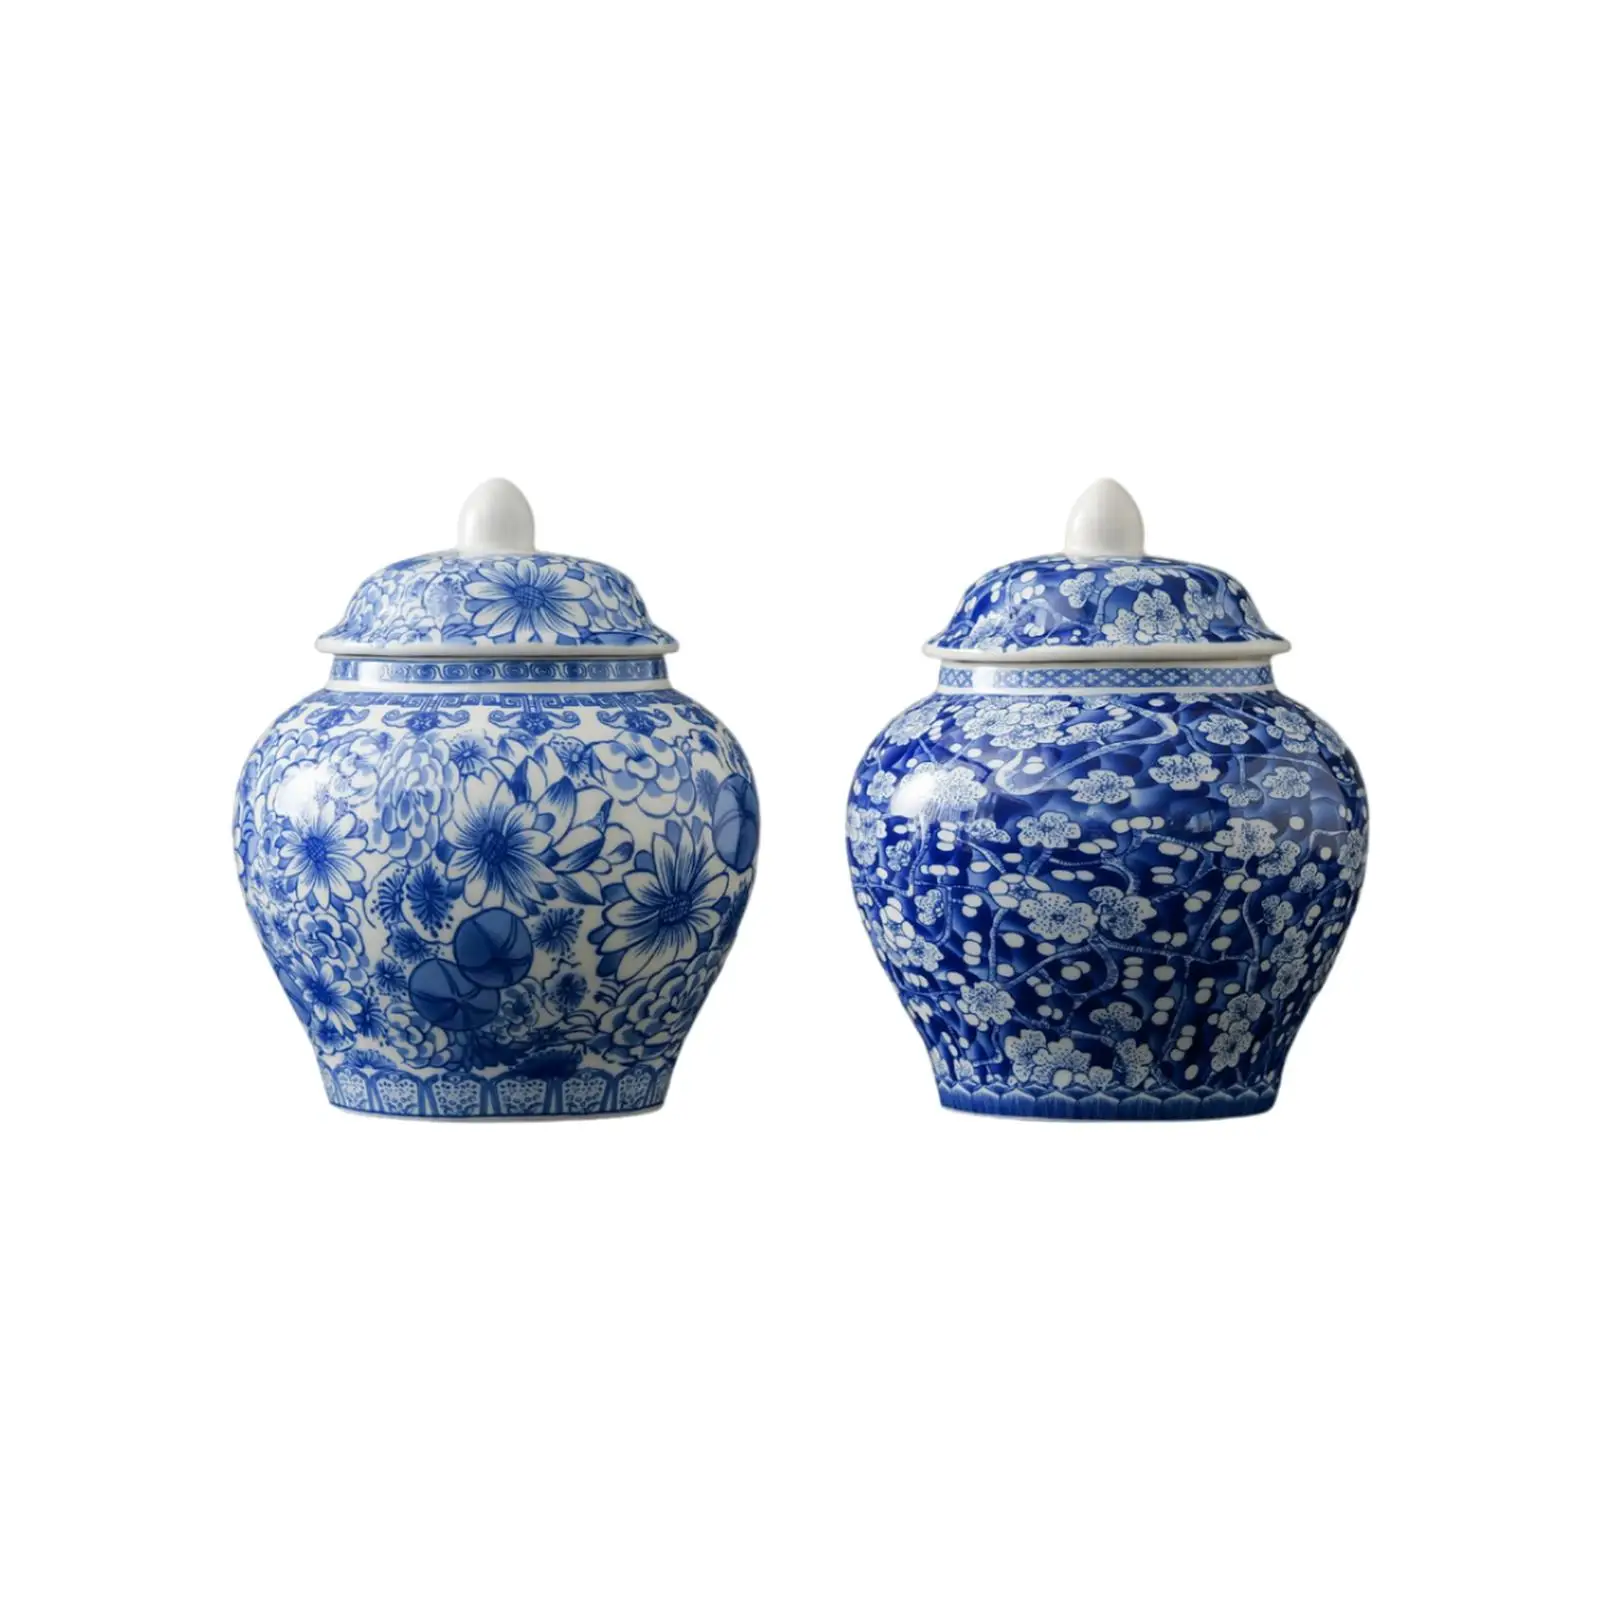 Blue and White Porcelain Ginger Jar Delicate Decoration Table Centerpieces Collection 650ml Tea Canister Decorative Vase